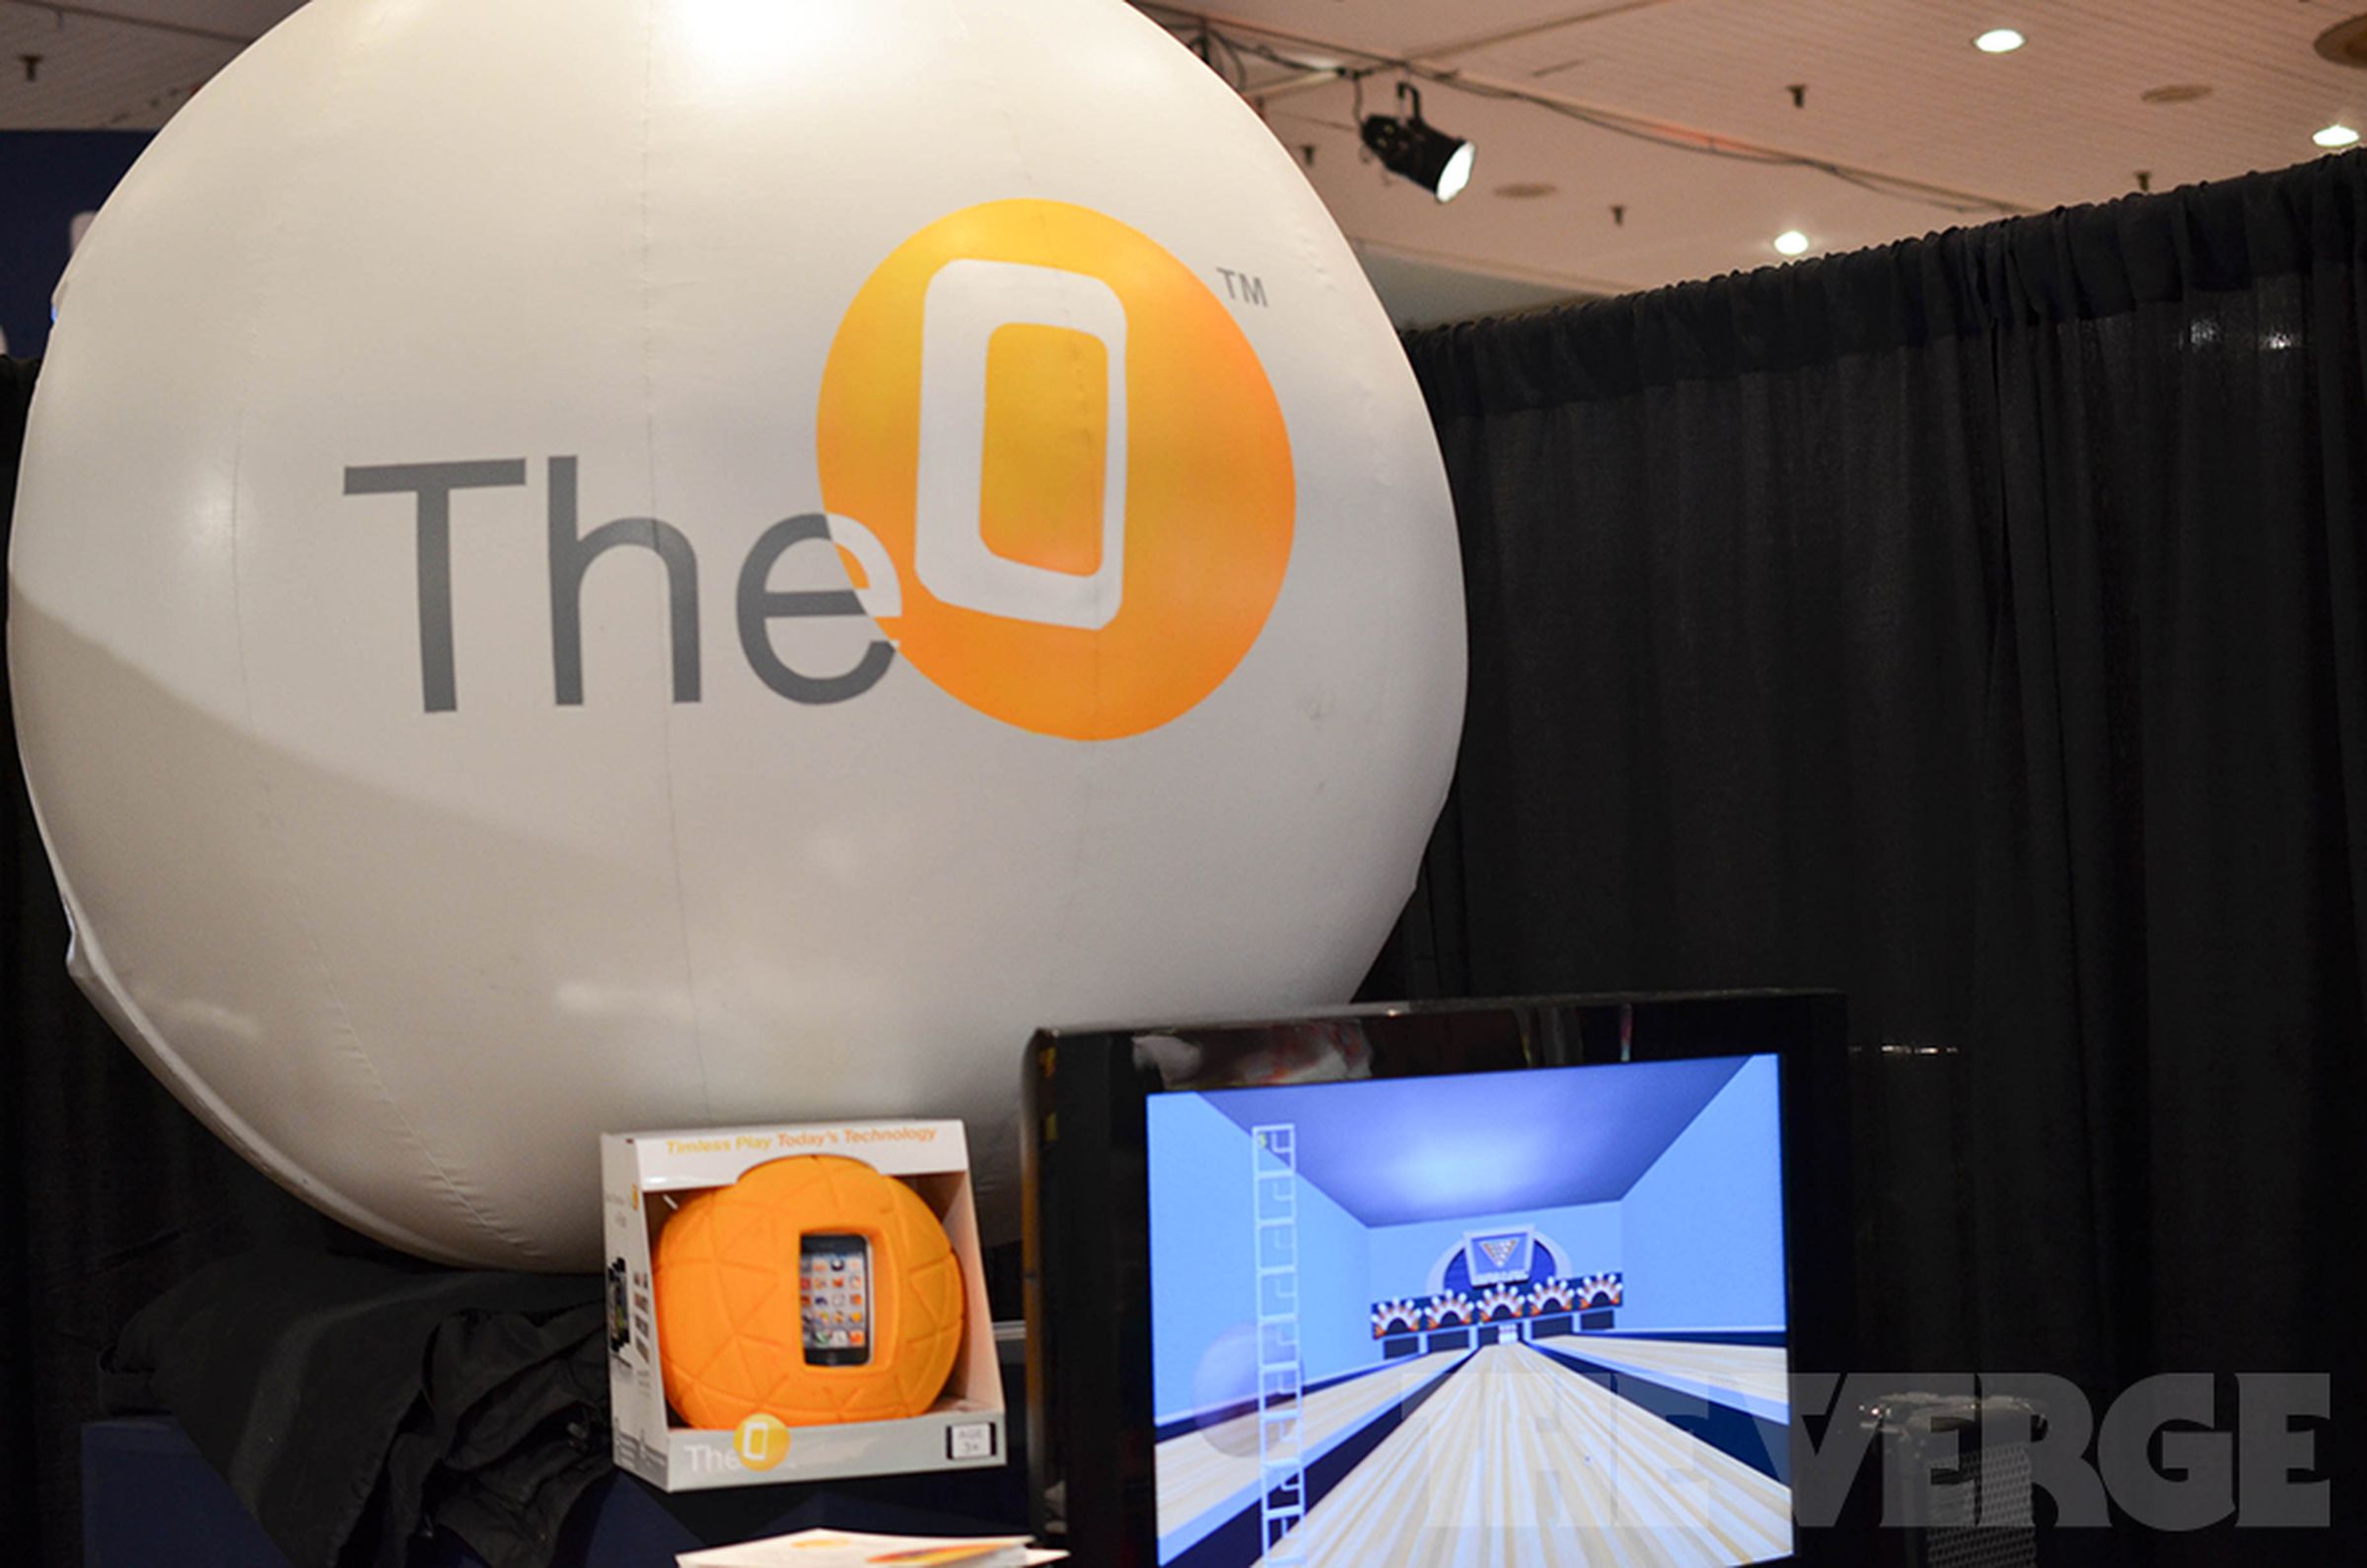 TheO smartphone accessory from Physical Apps (hands-on photos)